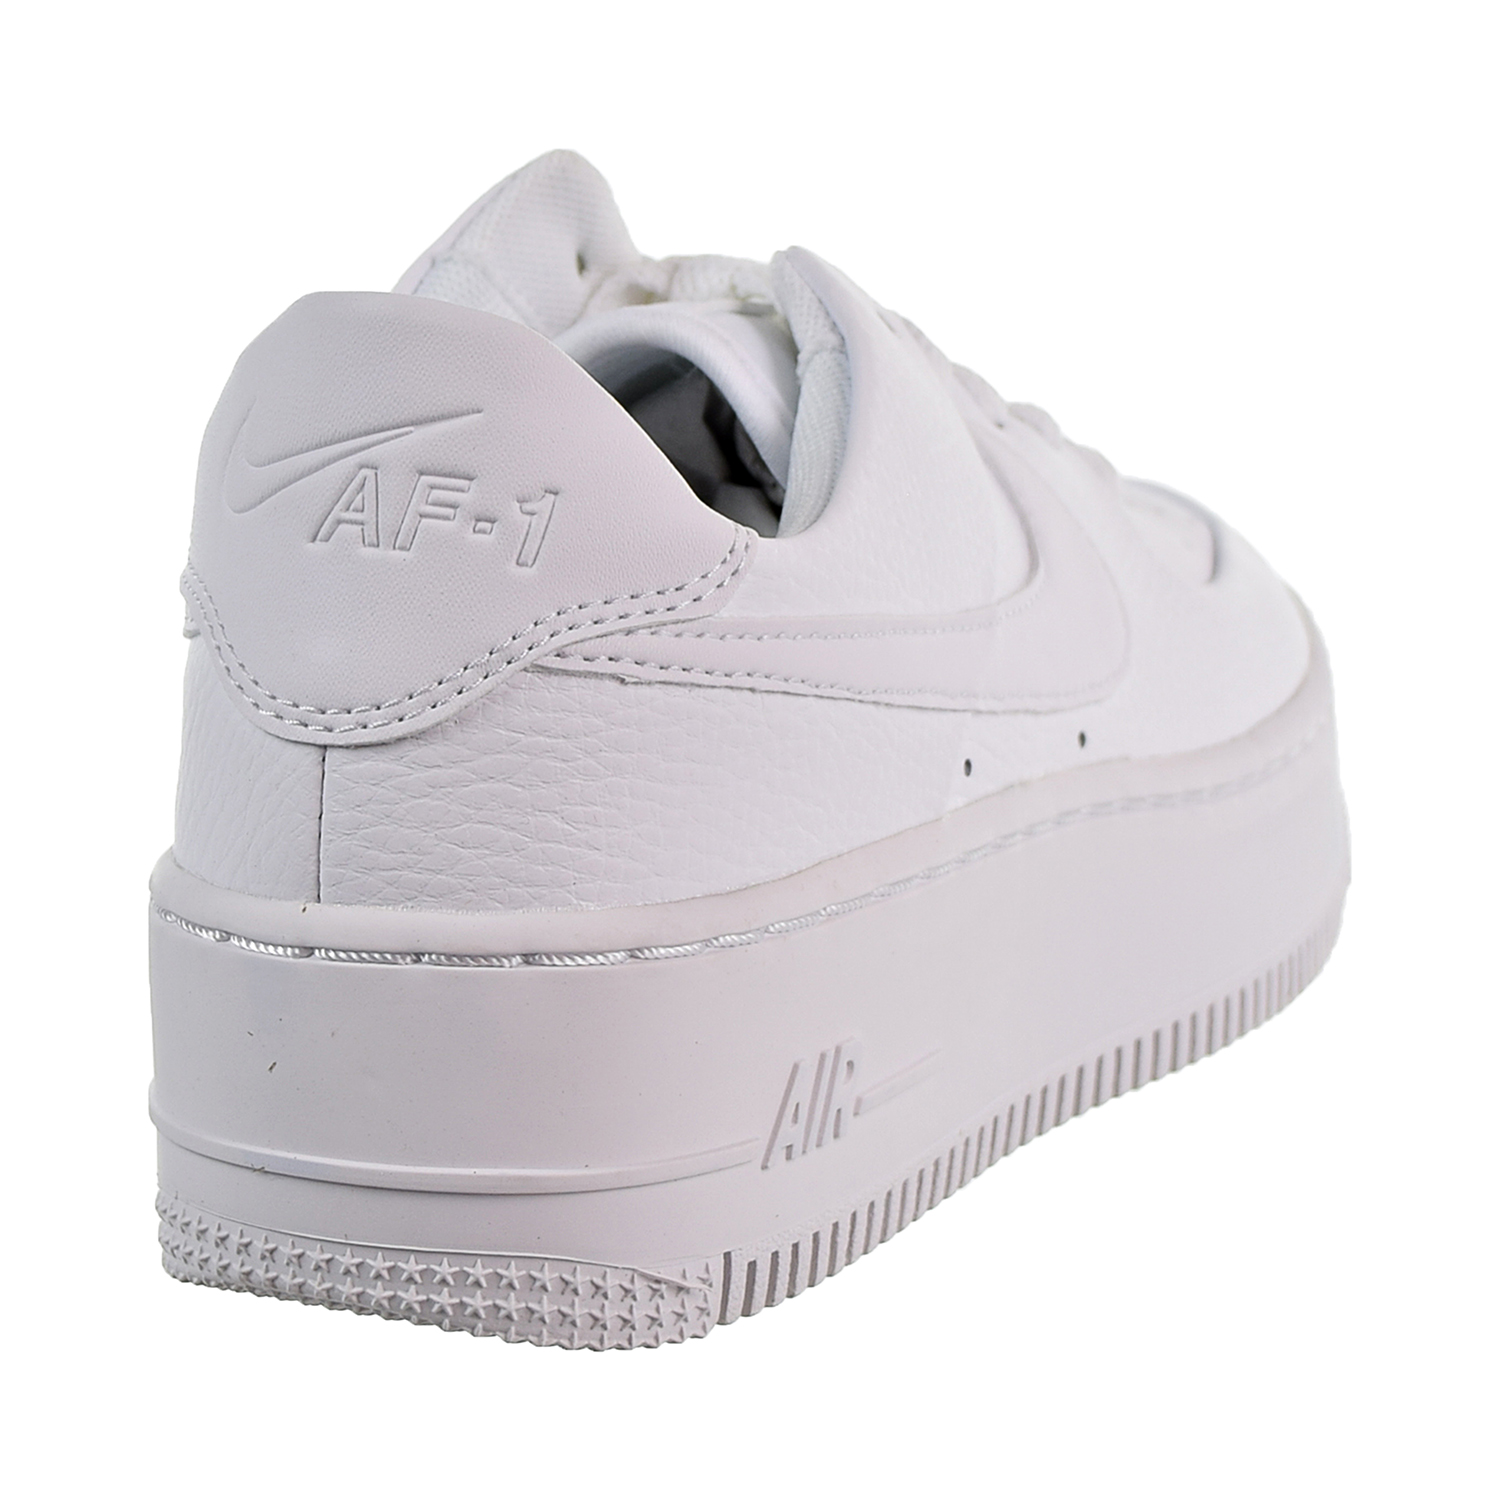 Nike Air Force 1 Sage Low Women's Shoes White/White ar5339-100